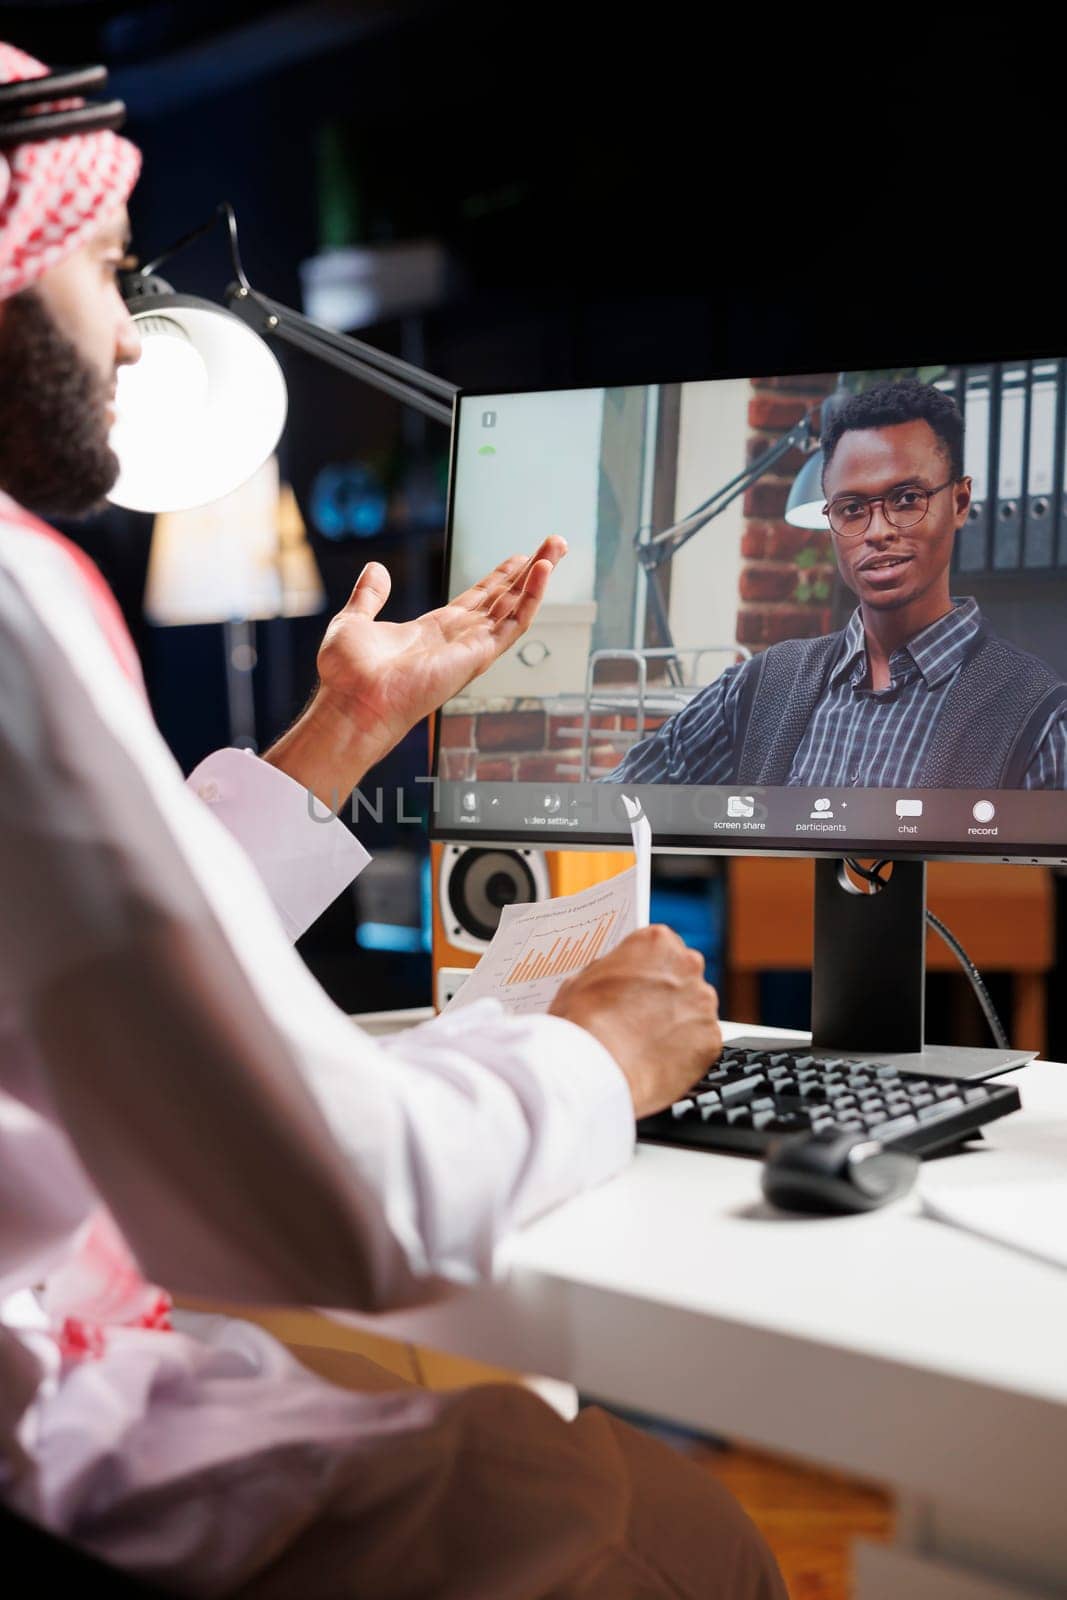 Video call is prominently featured on computer screen, showing conversation between Muslim freelancer and African-American colleague. Image underscores use of modern technology by young individuals.